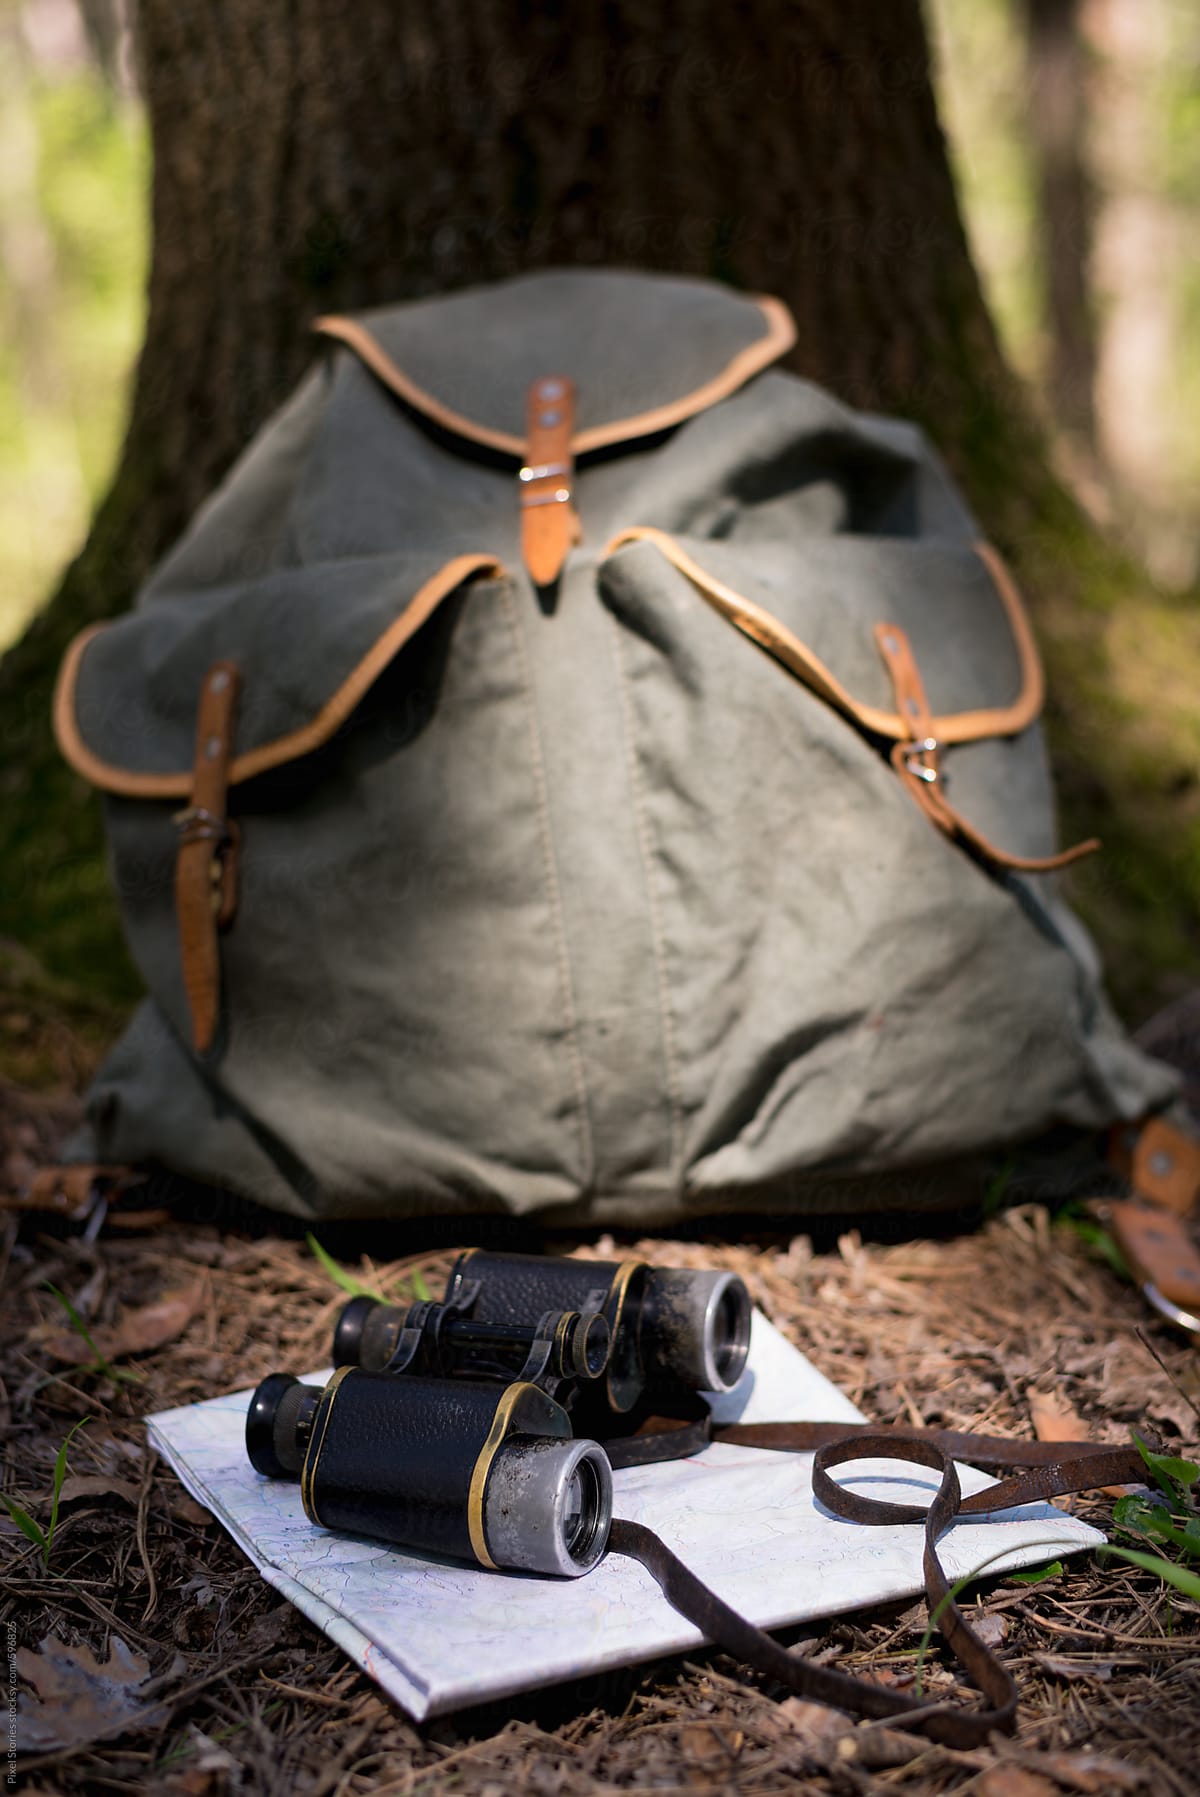 Vintage backpack, old binoculars and map next to a tree